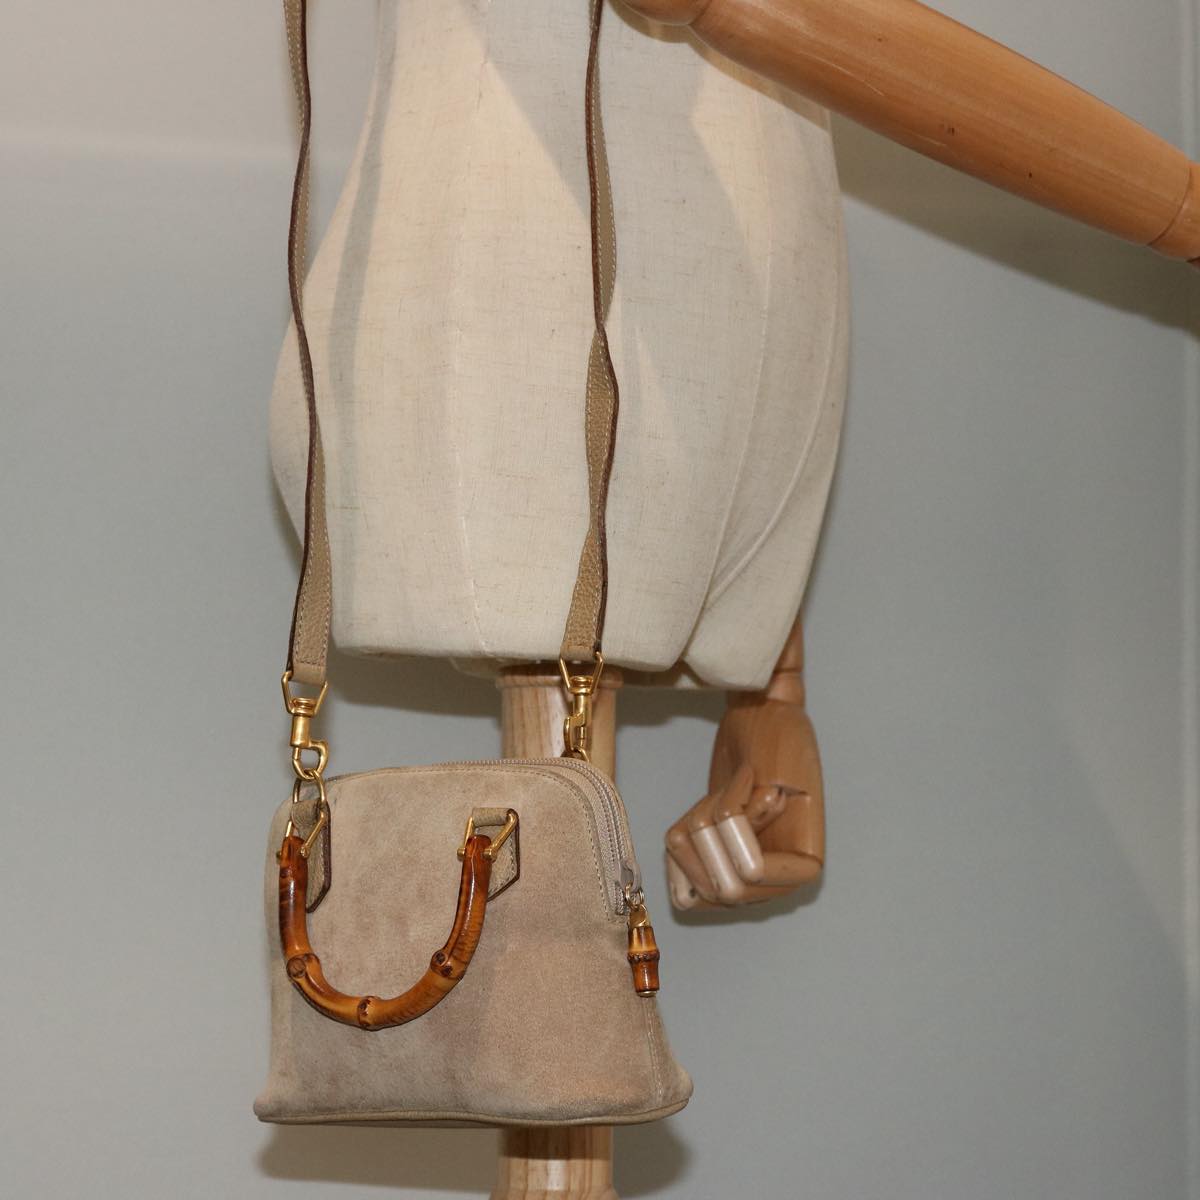 GUCCI Bamboo Hand Bag Suede 2way Beige 007 2032 0231 Auth 75795